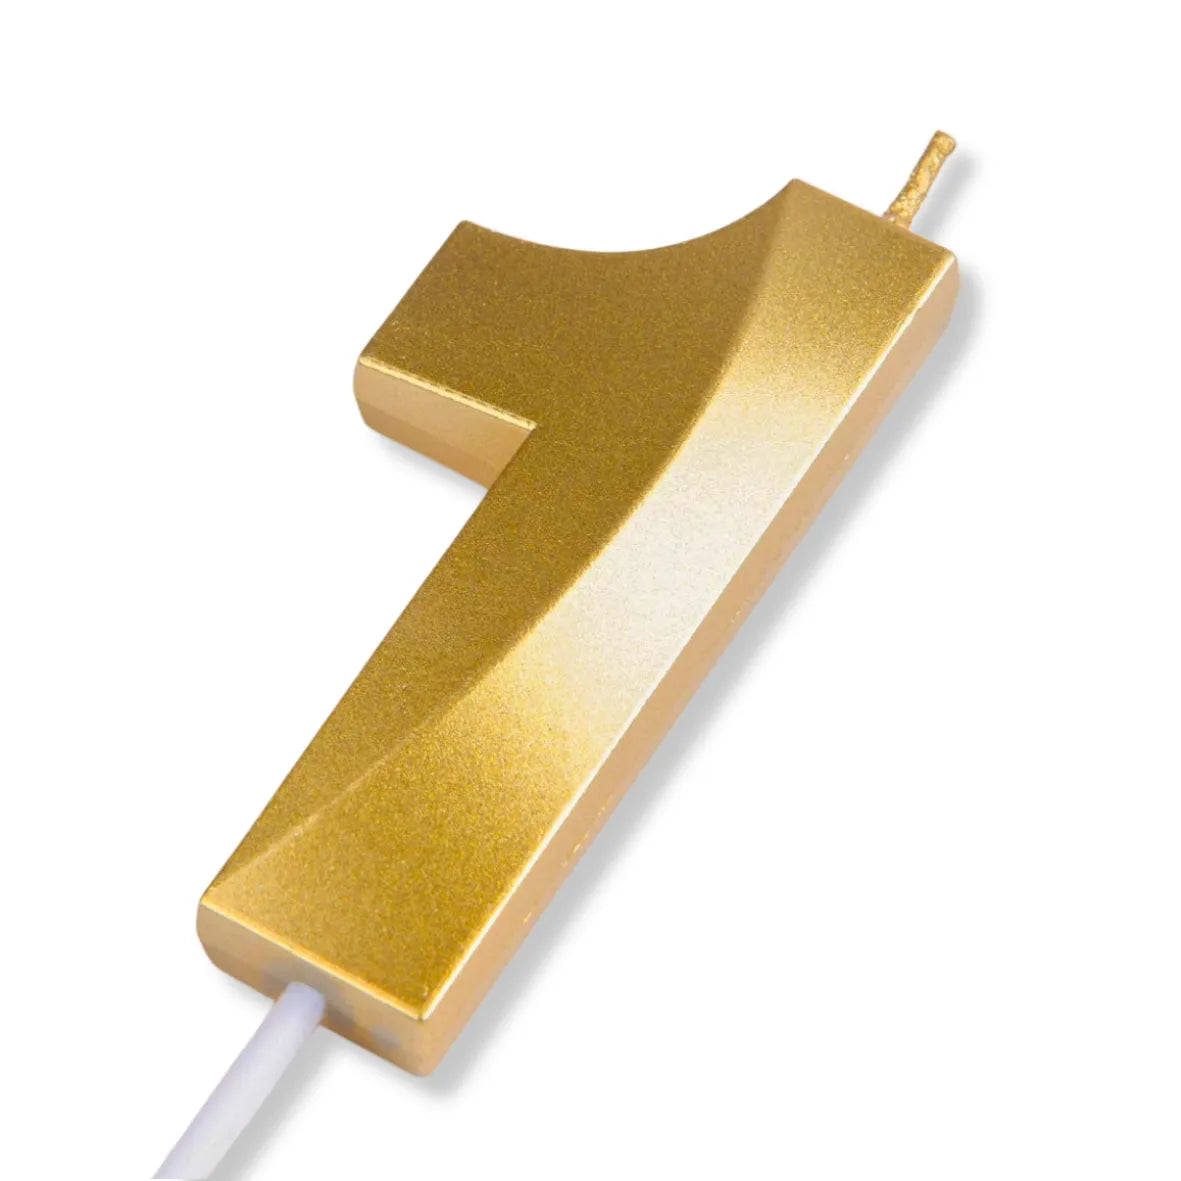 1 One Golden Number Candle (Copy) - thebakingtools.com